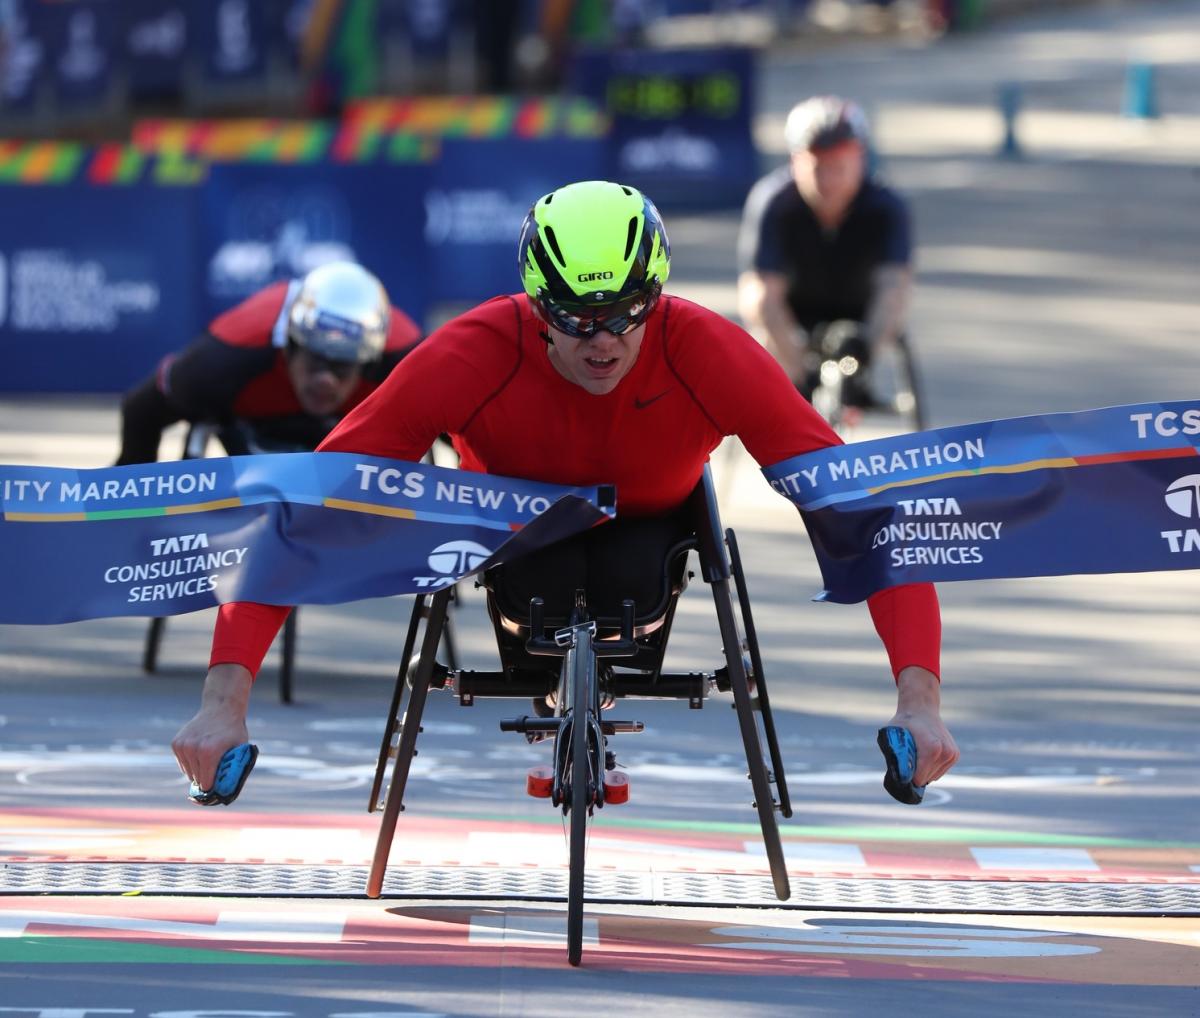 male wheelchair racer Daniel Romanchuk breaks the tape on the finish line ahead of two other wheelchair racers